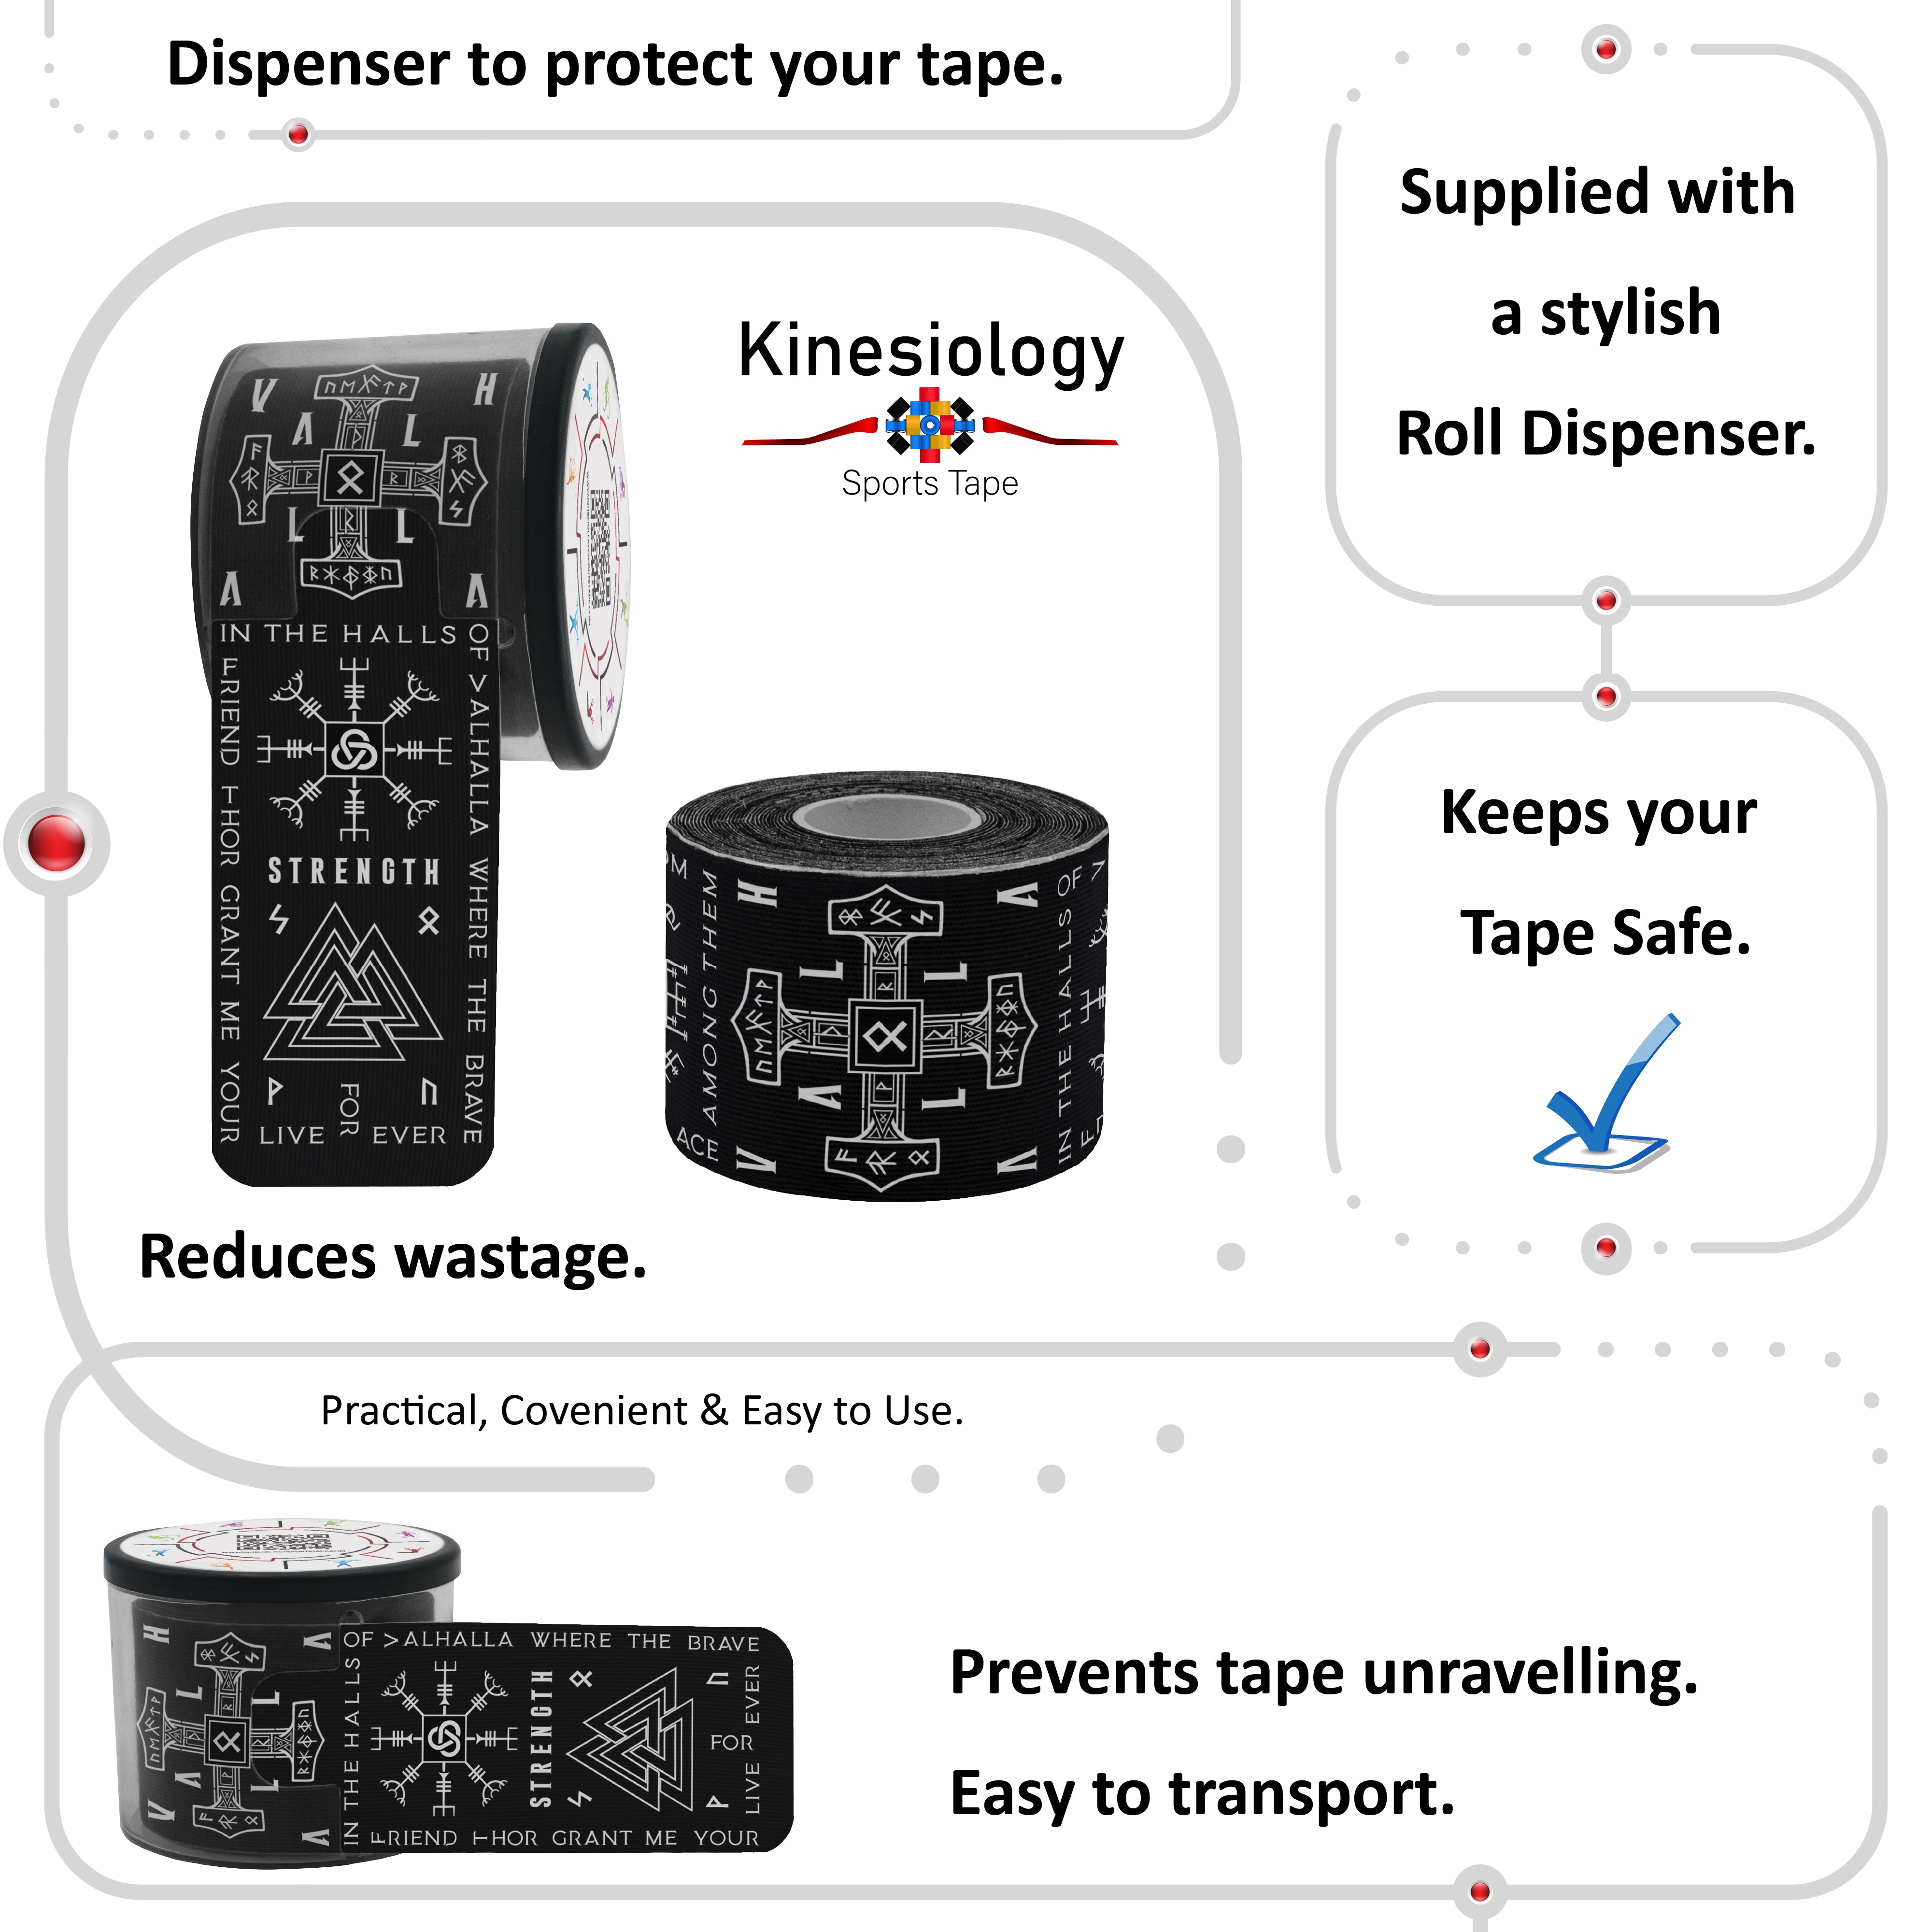 Black Kinesiology Tape Pre Cut with Dispenser - Talisman - Viking - Vertical Design - Athletic Sports Tape - For Healing and Recovery